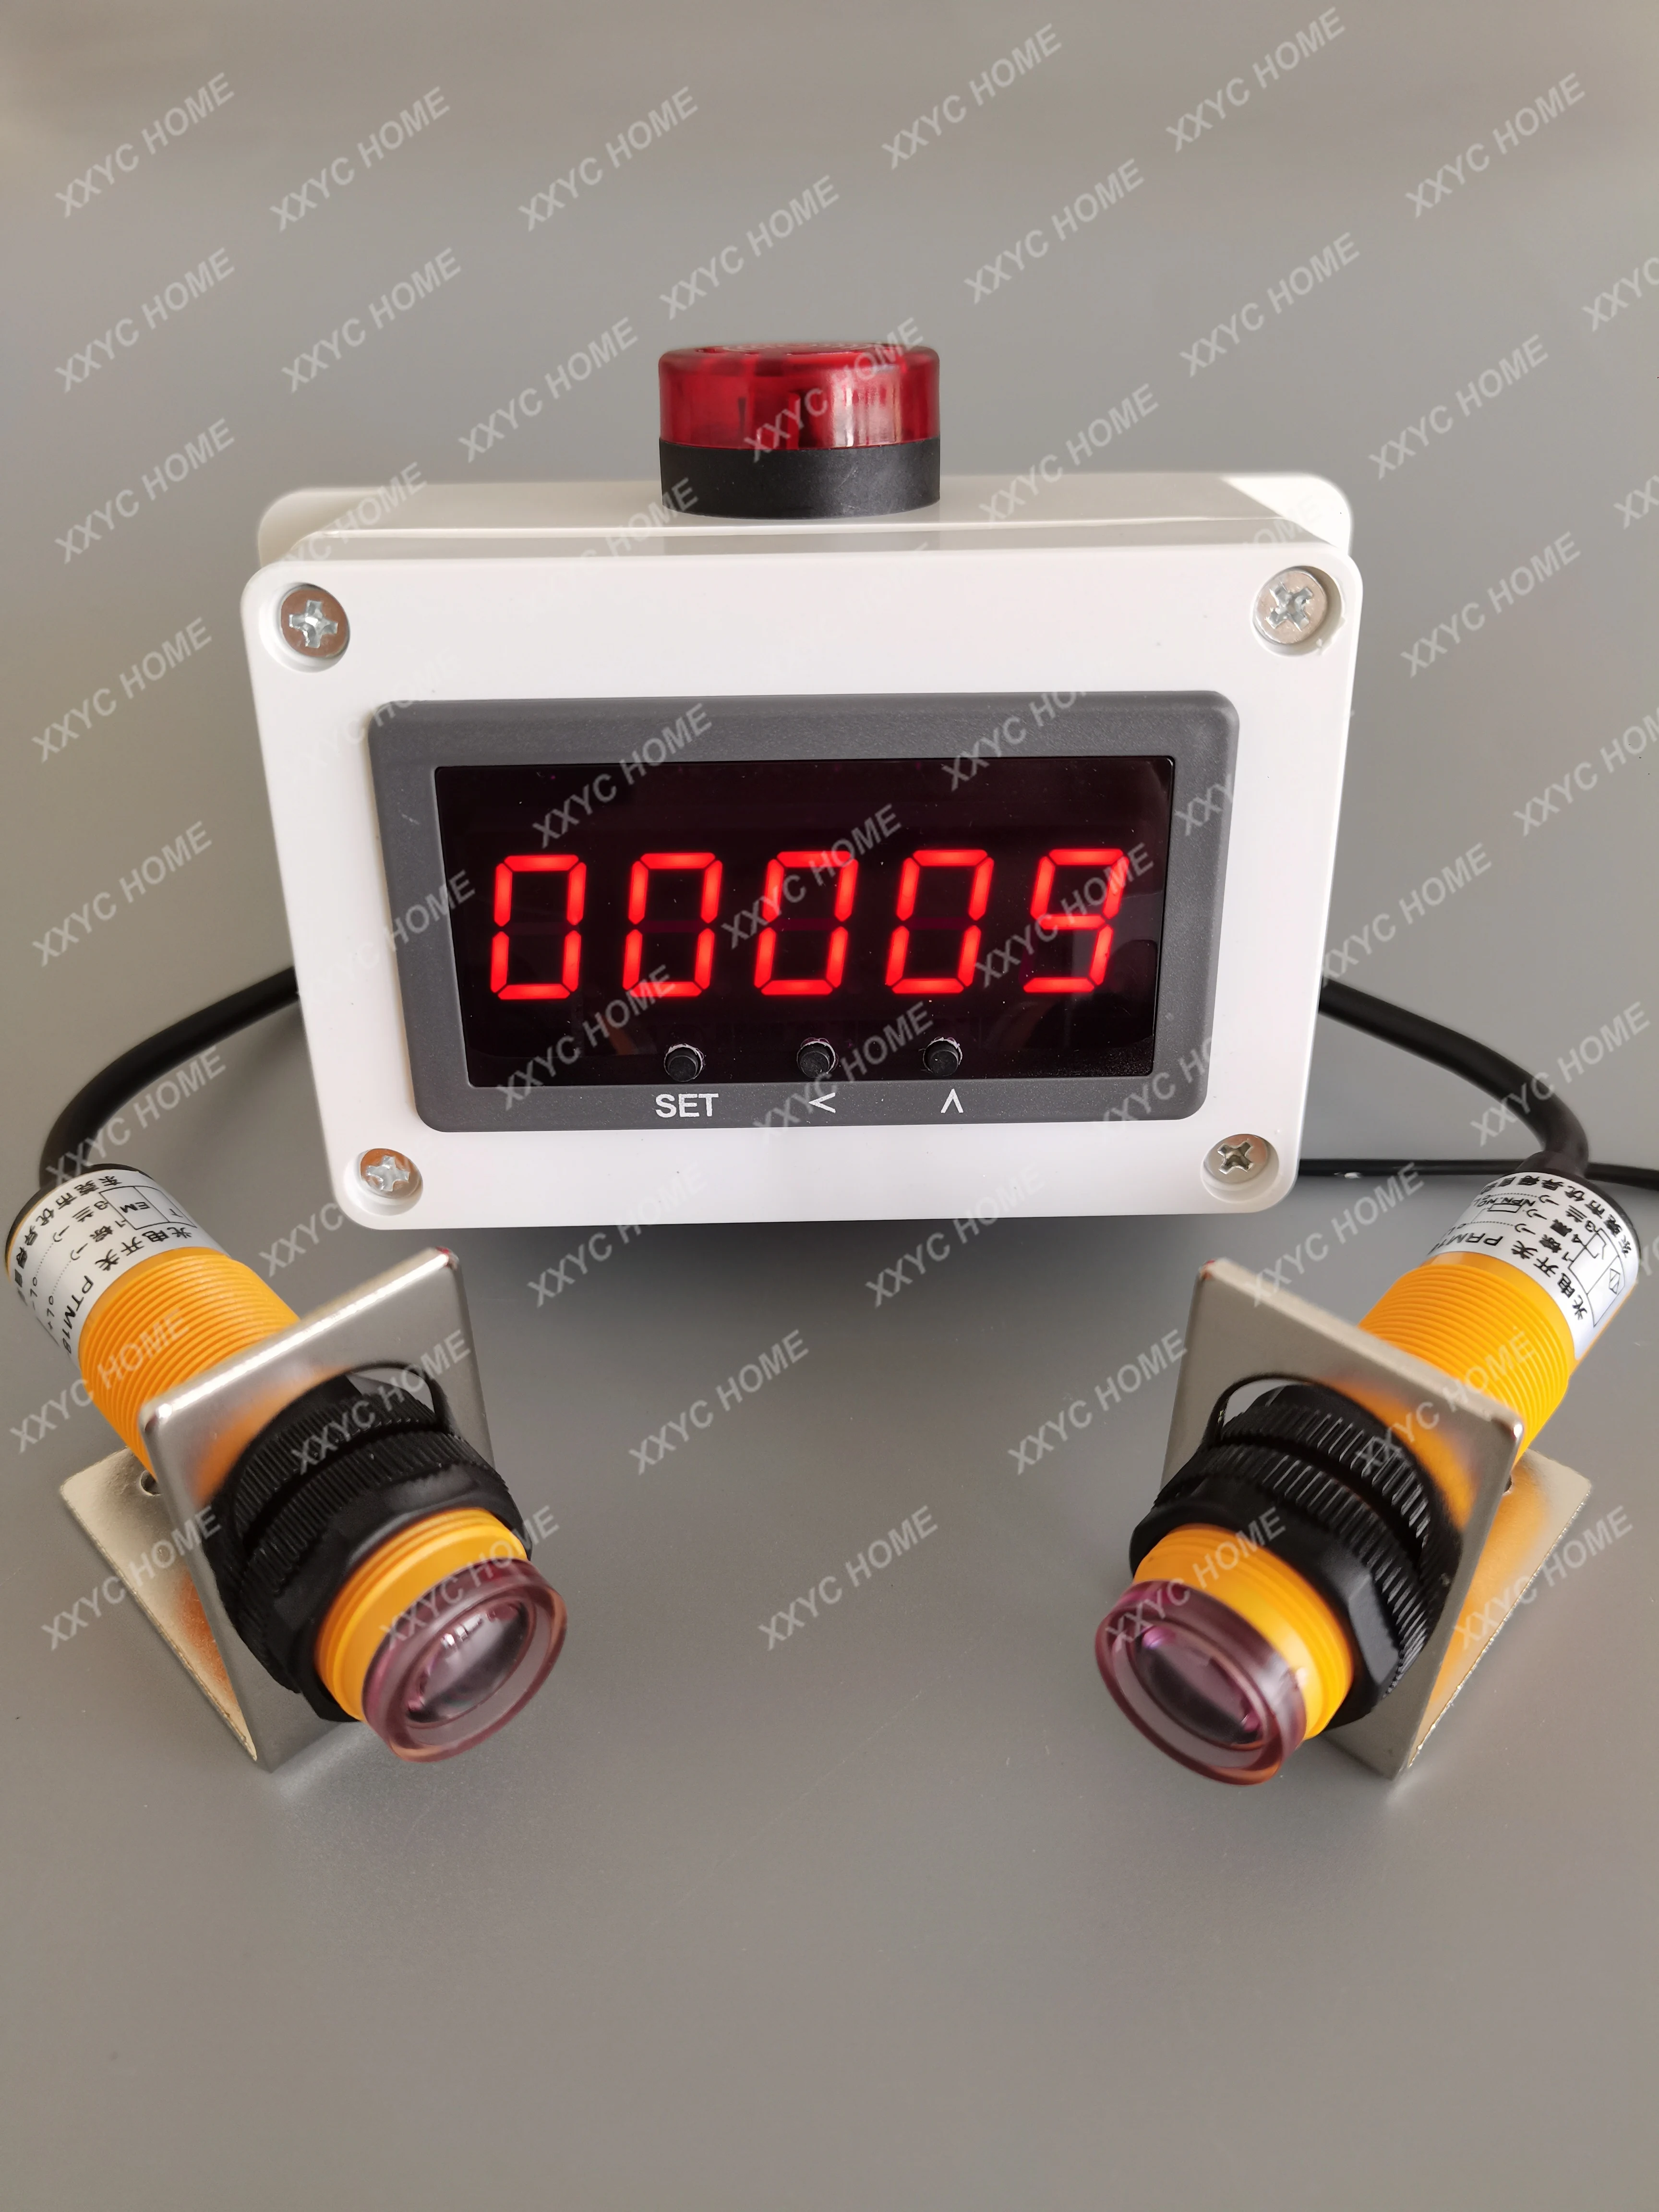 

Counter Automatic Induction Infrared Conveyor Assembly Line Conveyor Belt Number Intelligent Electronic Digital Display Counter